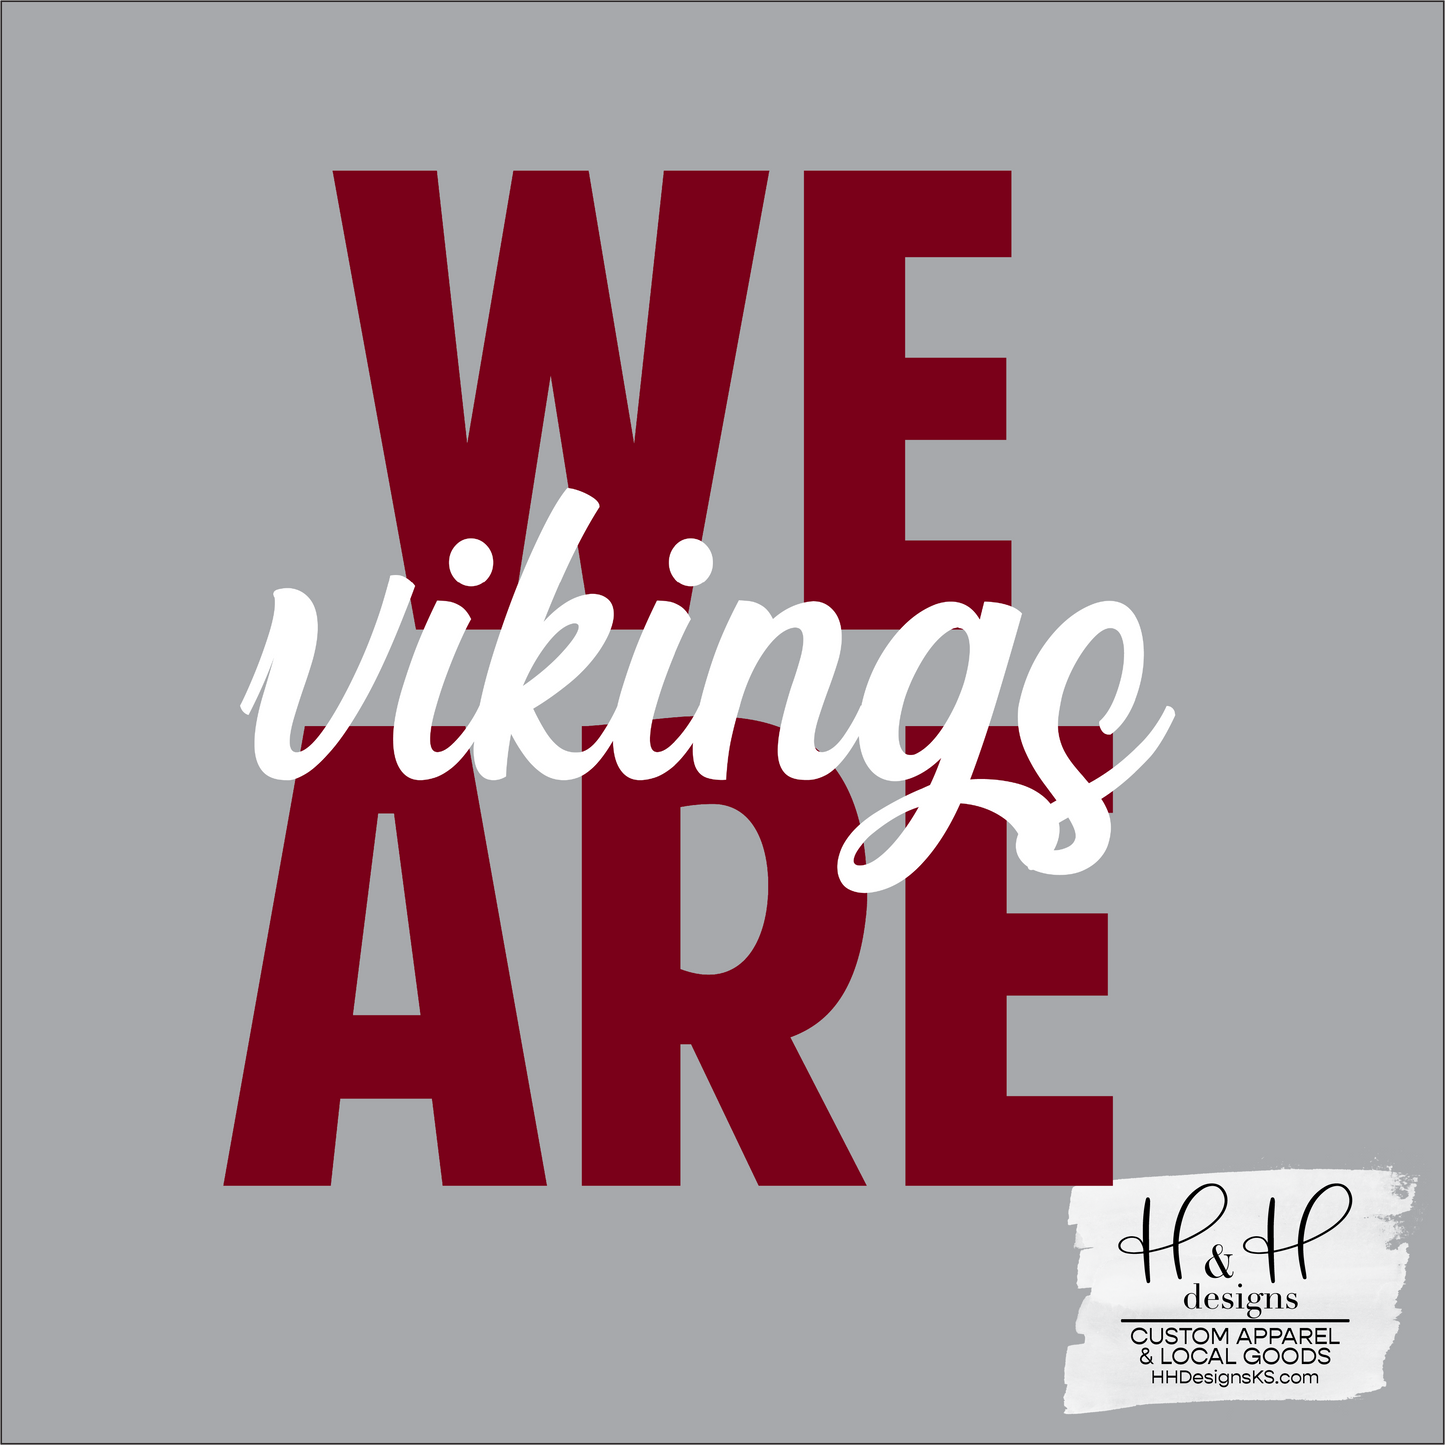 We are Vikings ~ Seaman Middle School PTO Fundraiser